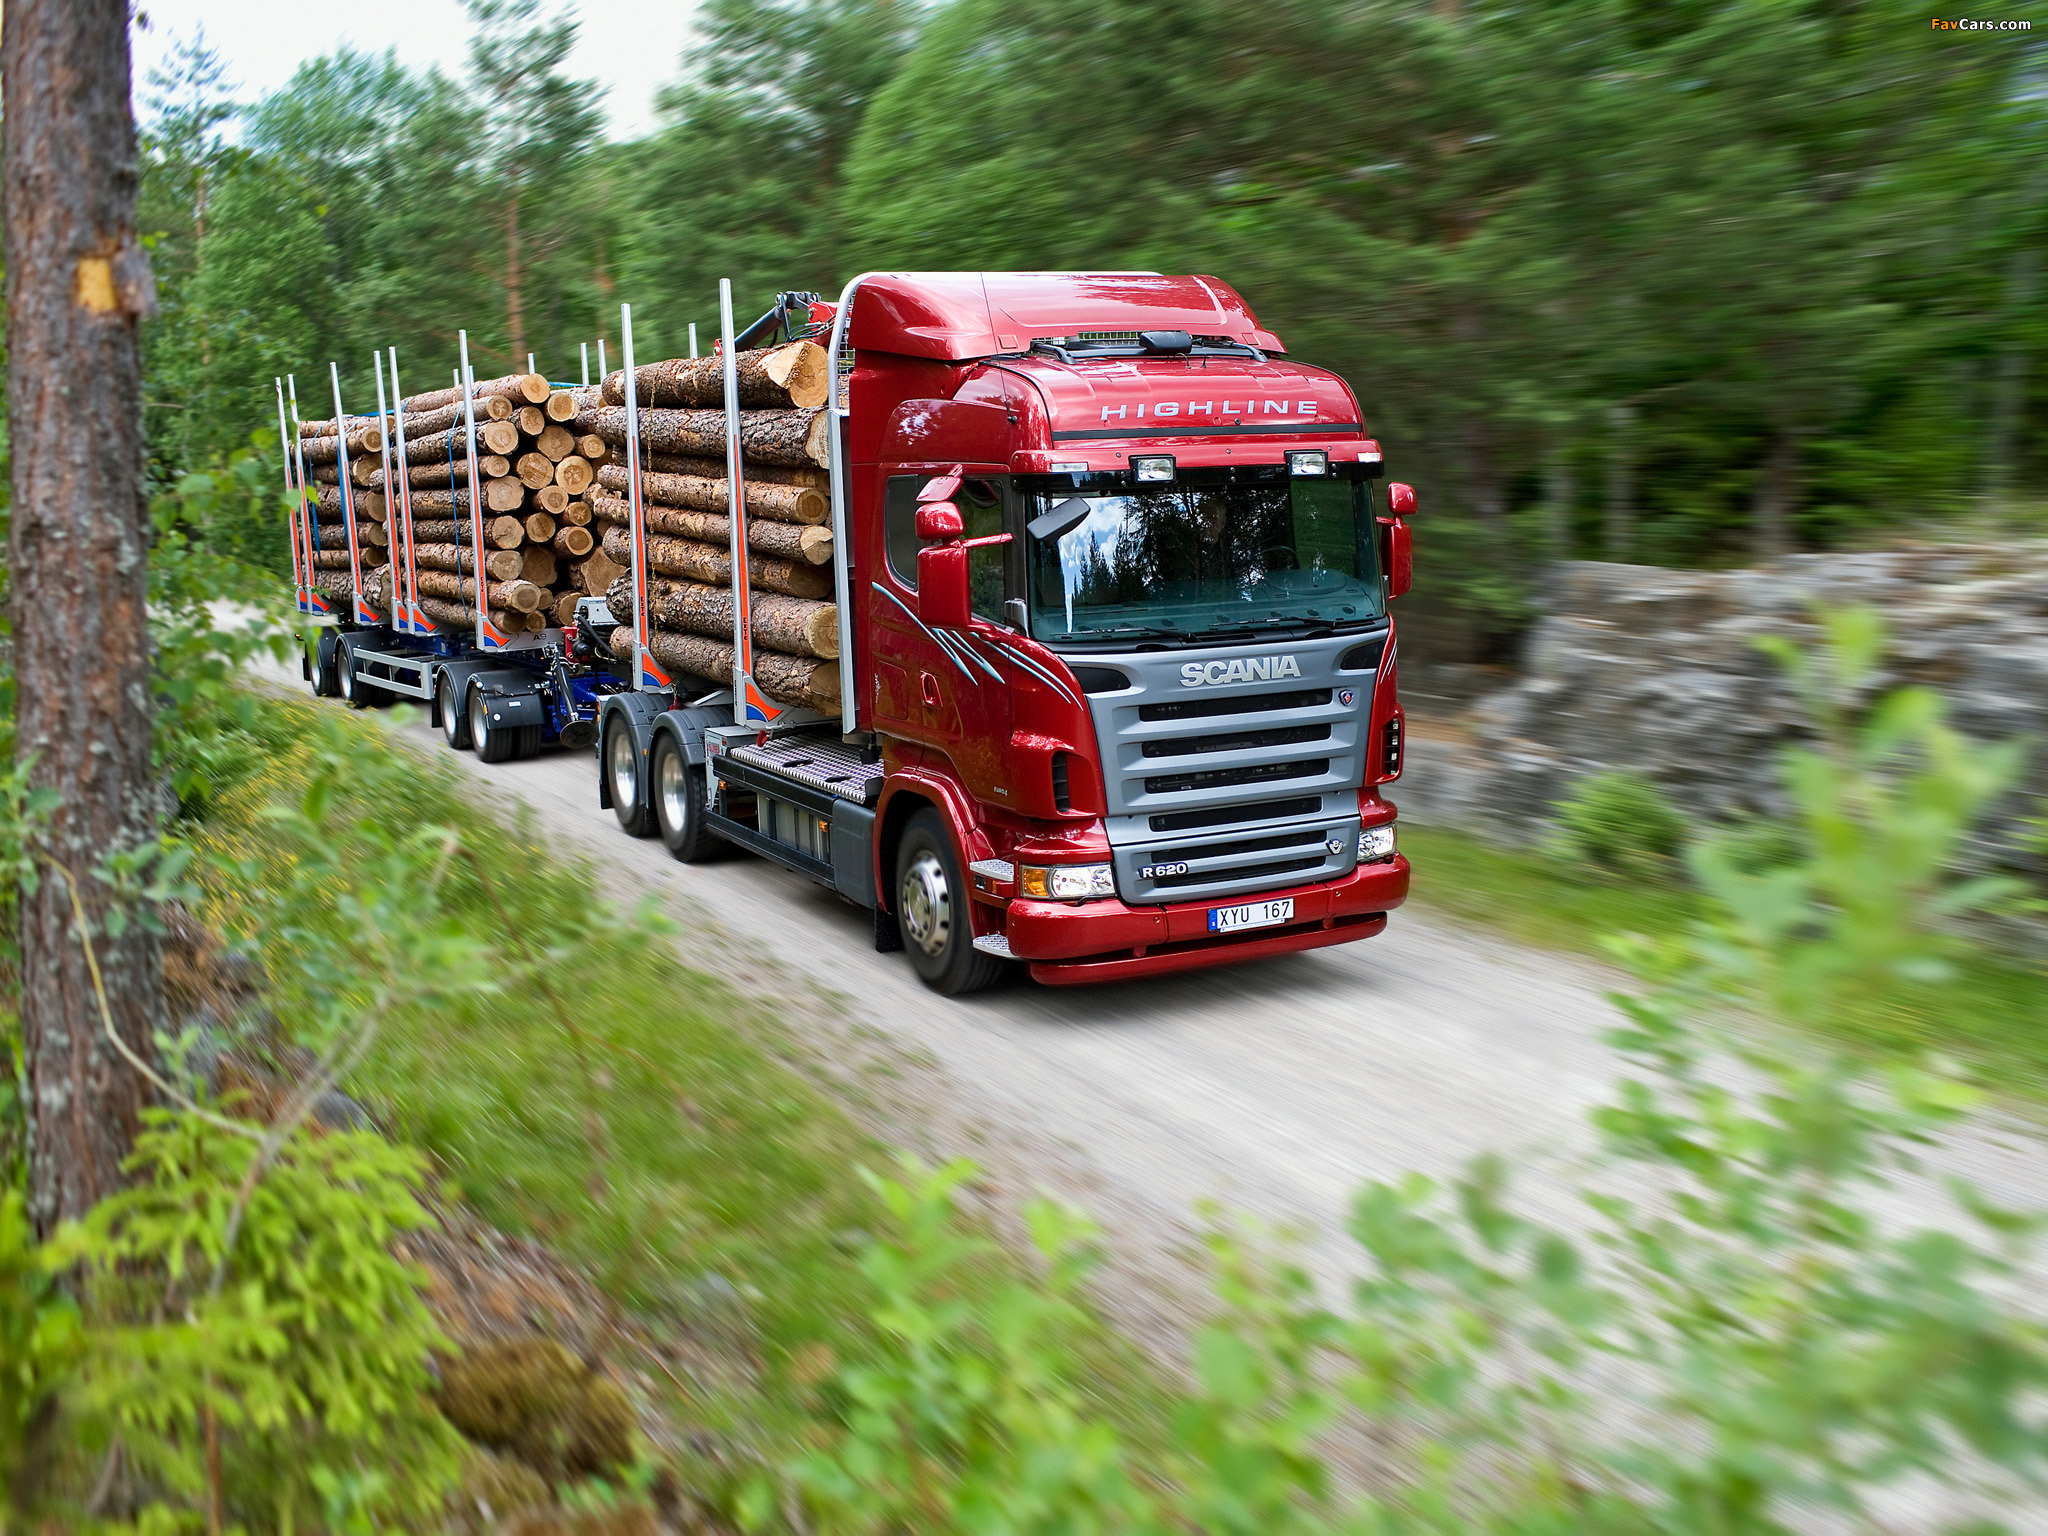 Scania R620 Wallpapers